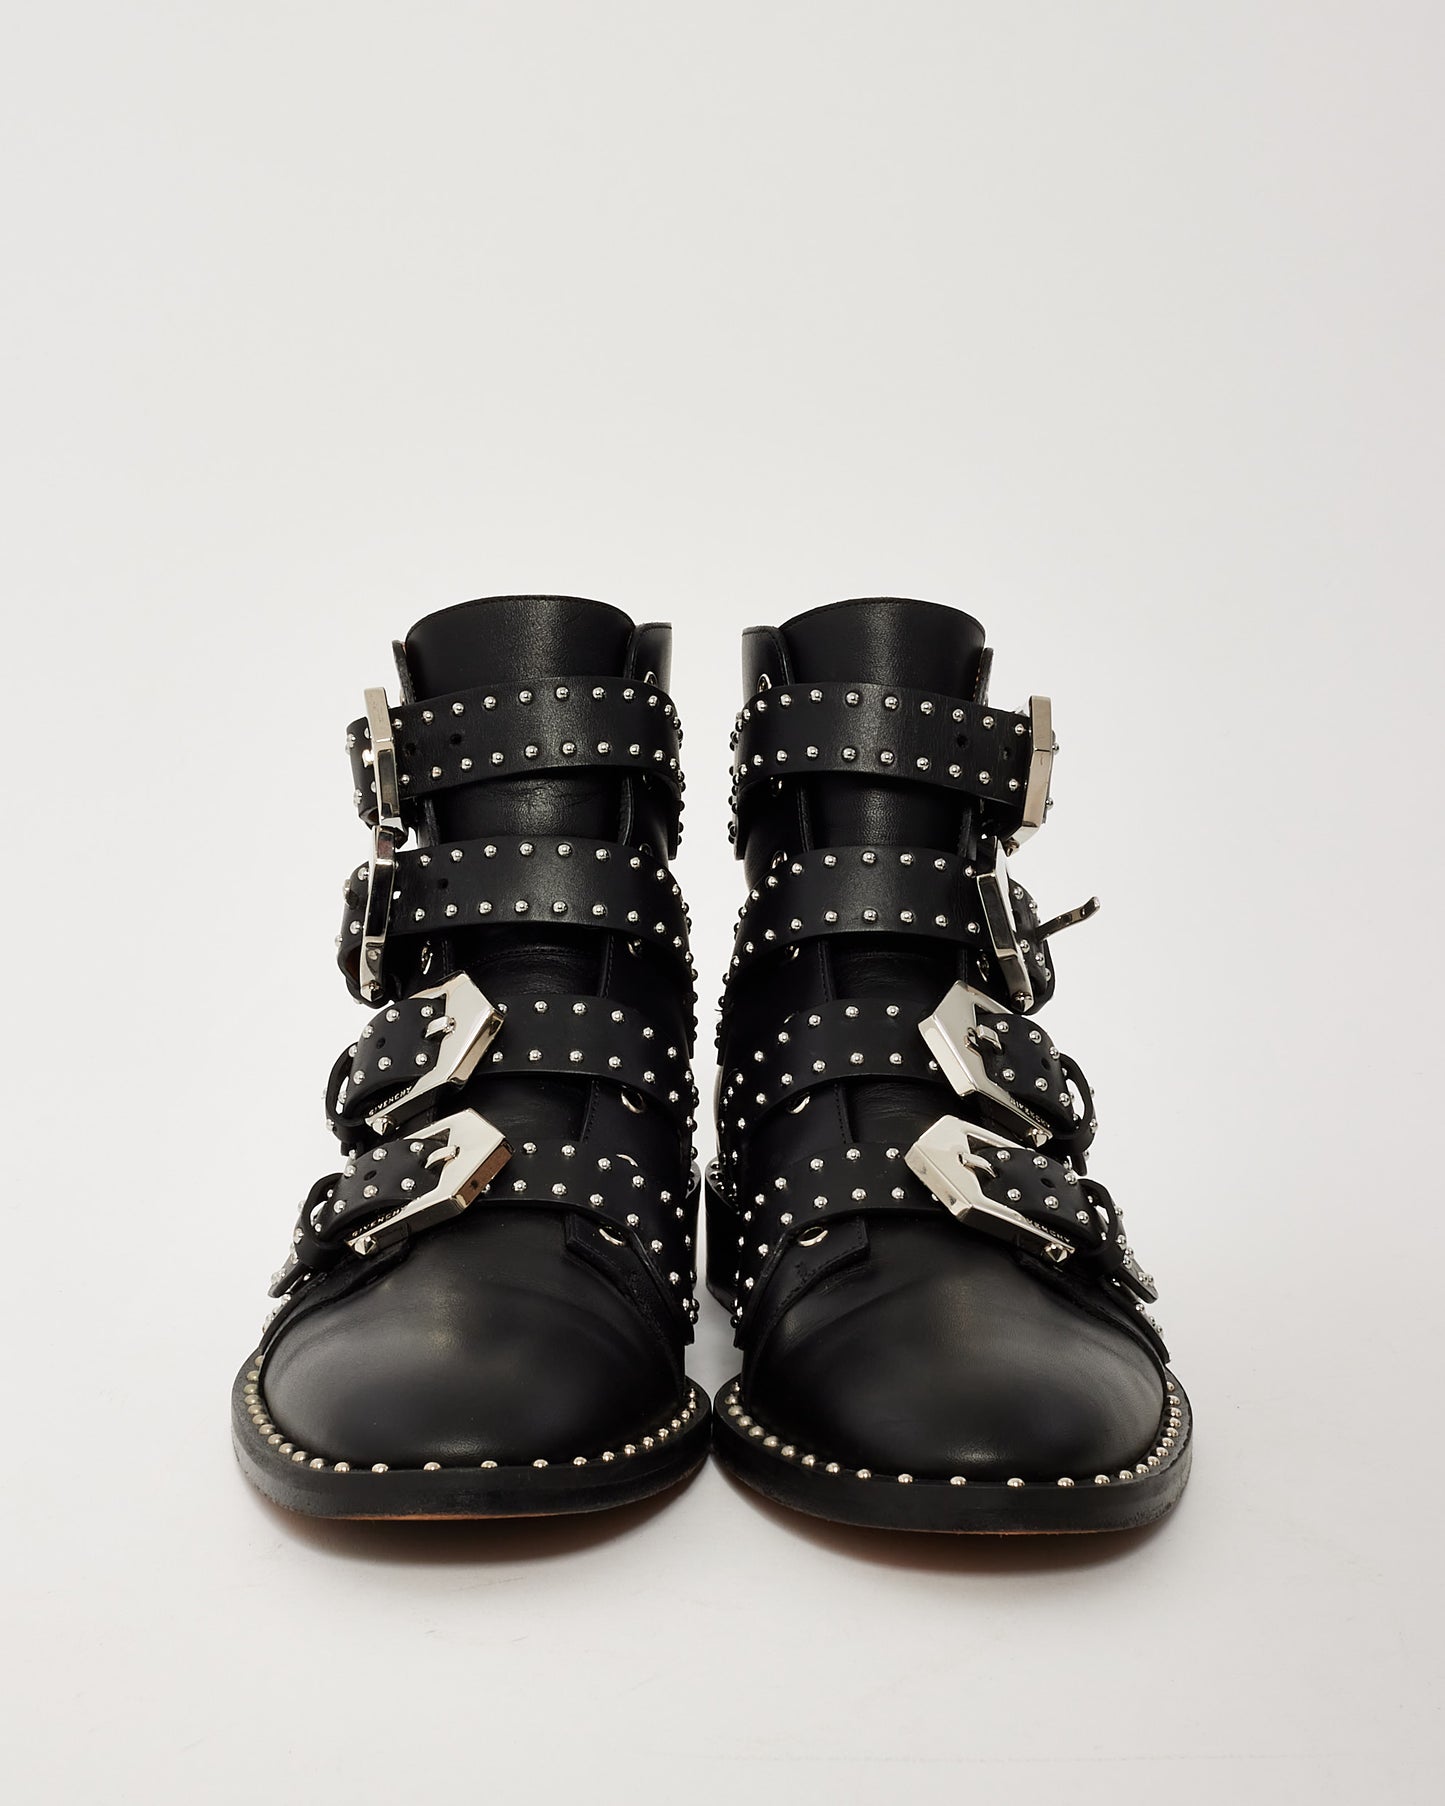 Givenchy Black Leather Studded Prue Buckle Bootie - 36